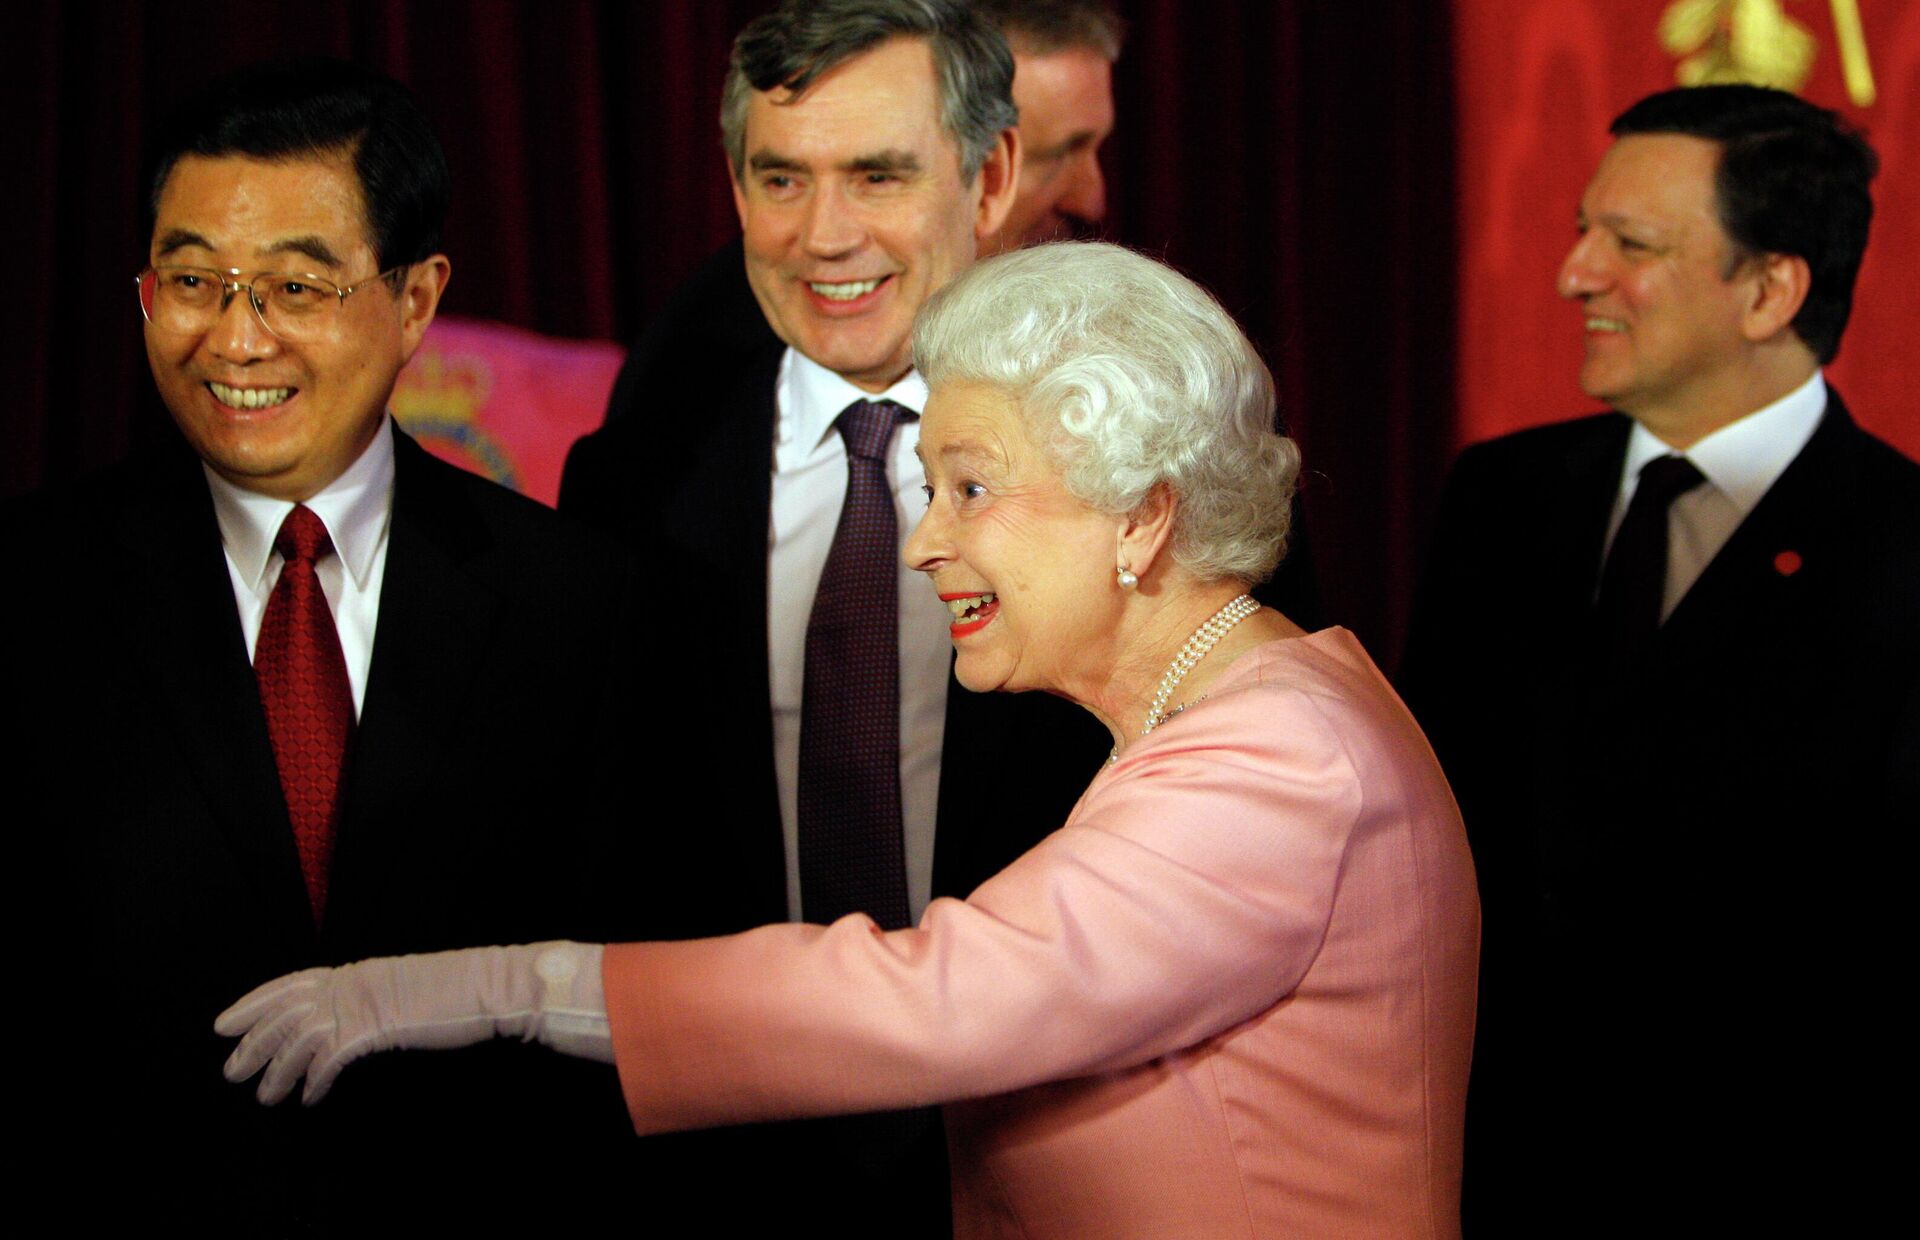 FILE - Britain's Queen Elizabeth II gestures in front of Britain's Prime Minister Gordon Brown, back center, after a group photograph of G20 leaders at Buckingham Palace in London, Wednesday, April 1, 2009. At left China's President Hu Jintao, at right in background, President of the European Commission, Jose Manuel Barroso. In seven decades on the throne, Queen Elizabeth II saw 15 British prime ministers come and go, from Winston Churchill to Margaret Thatcher to Boris Johnson to Liz Truss. - Sputnik International, 1920, 09.09.2022